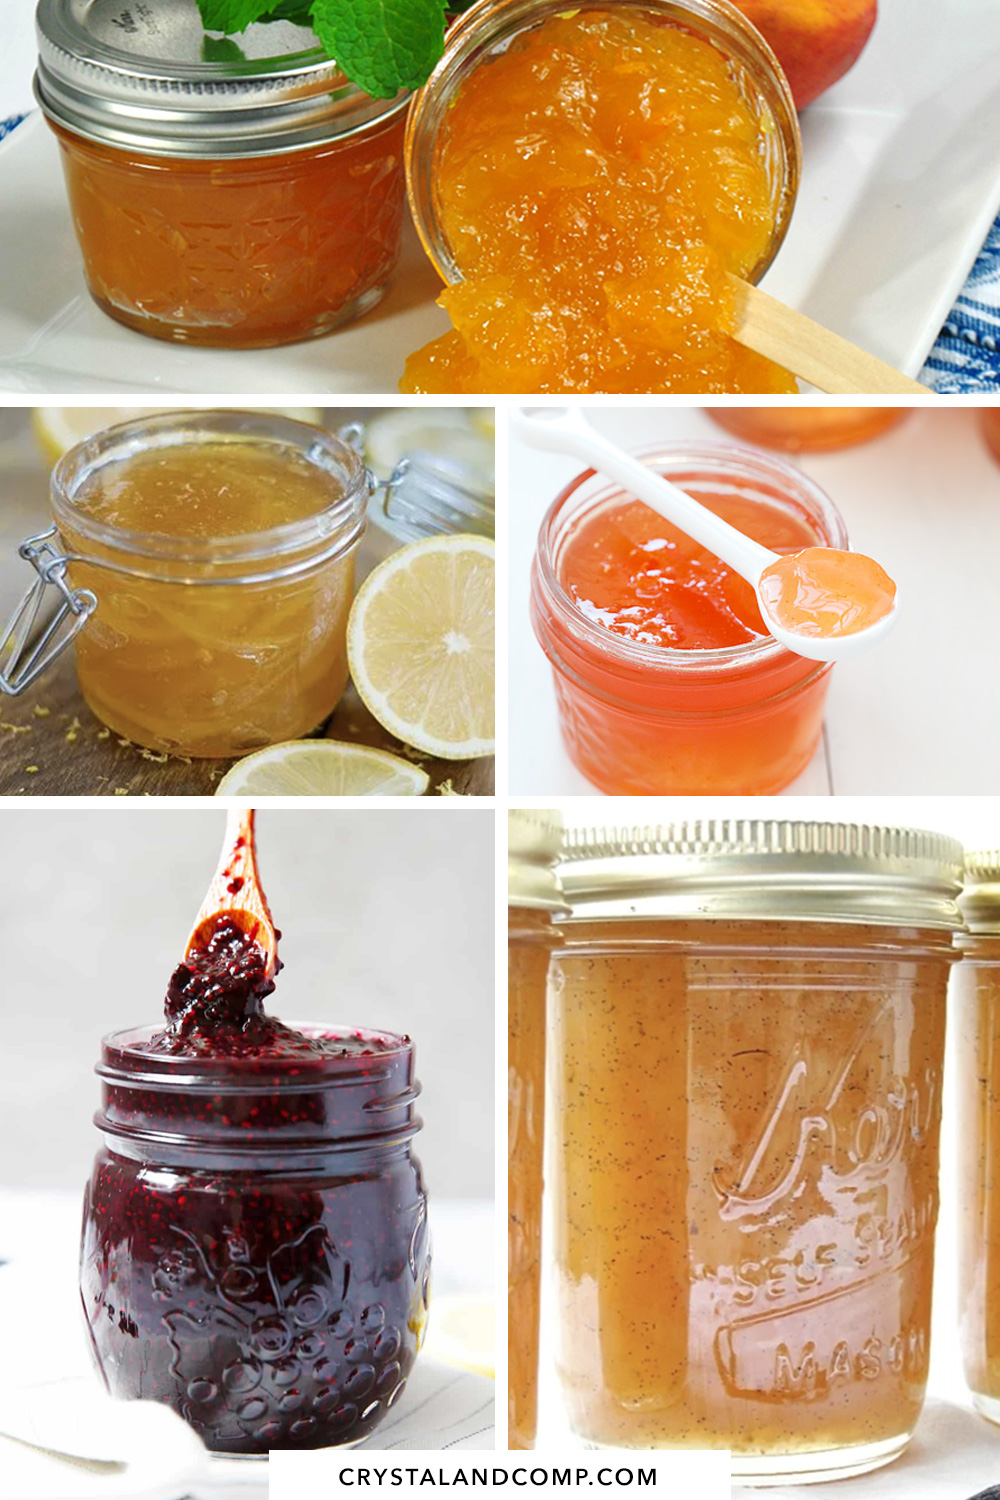 20 Scrumptious Homemade Jam and Jelly Recipes